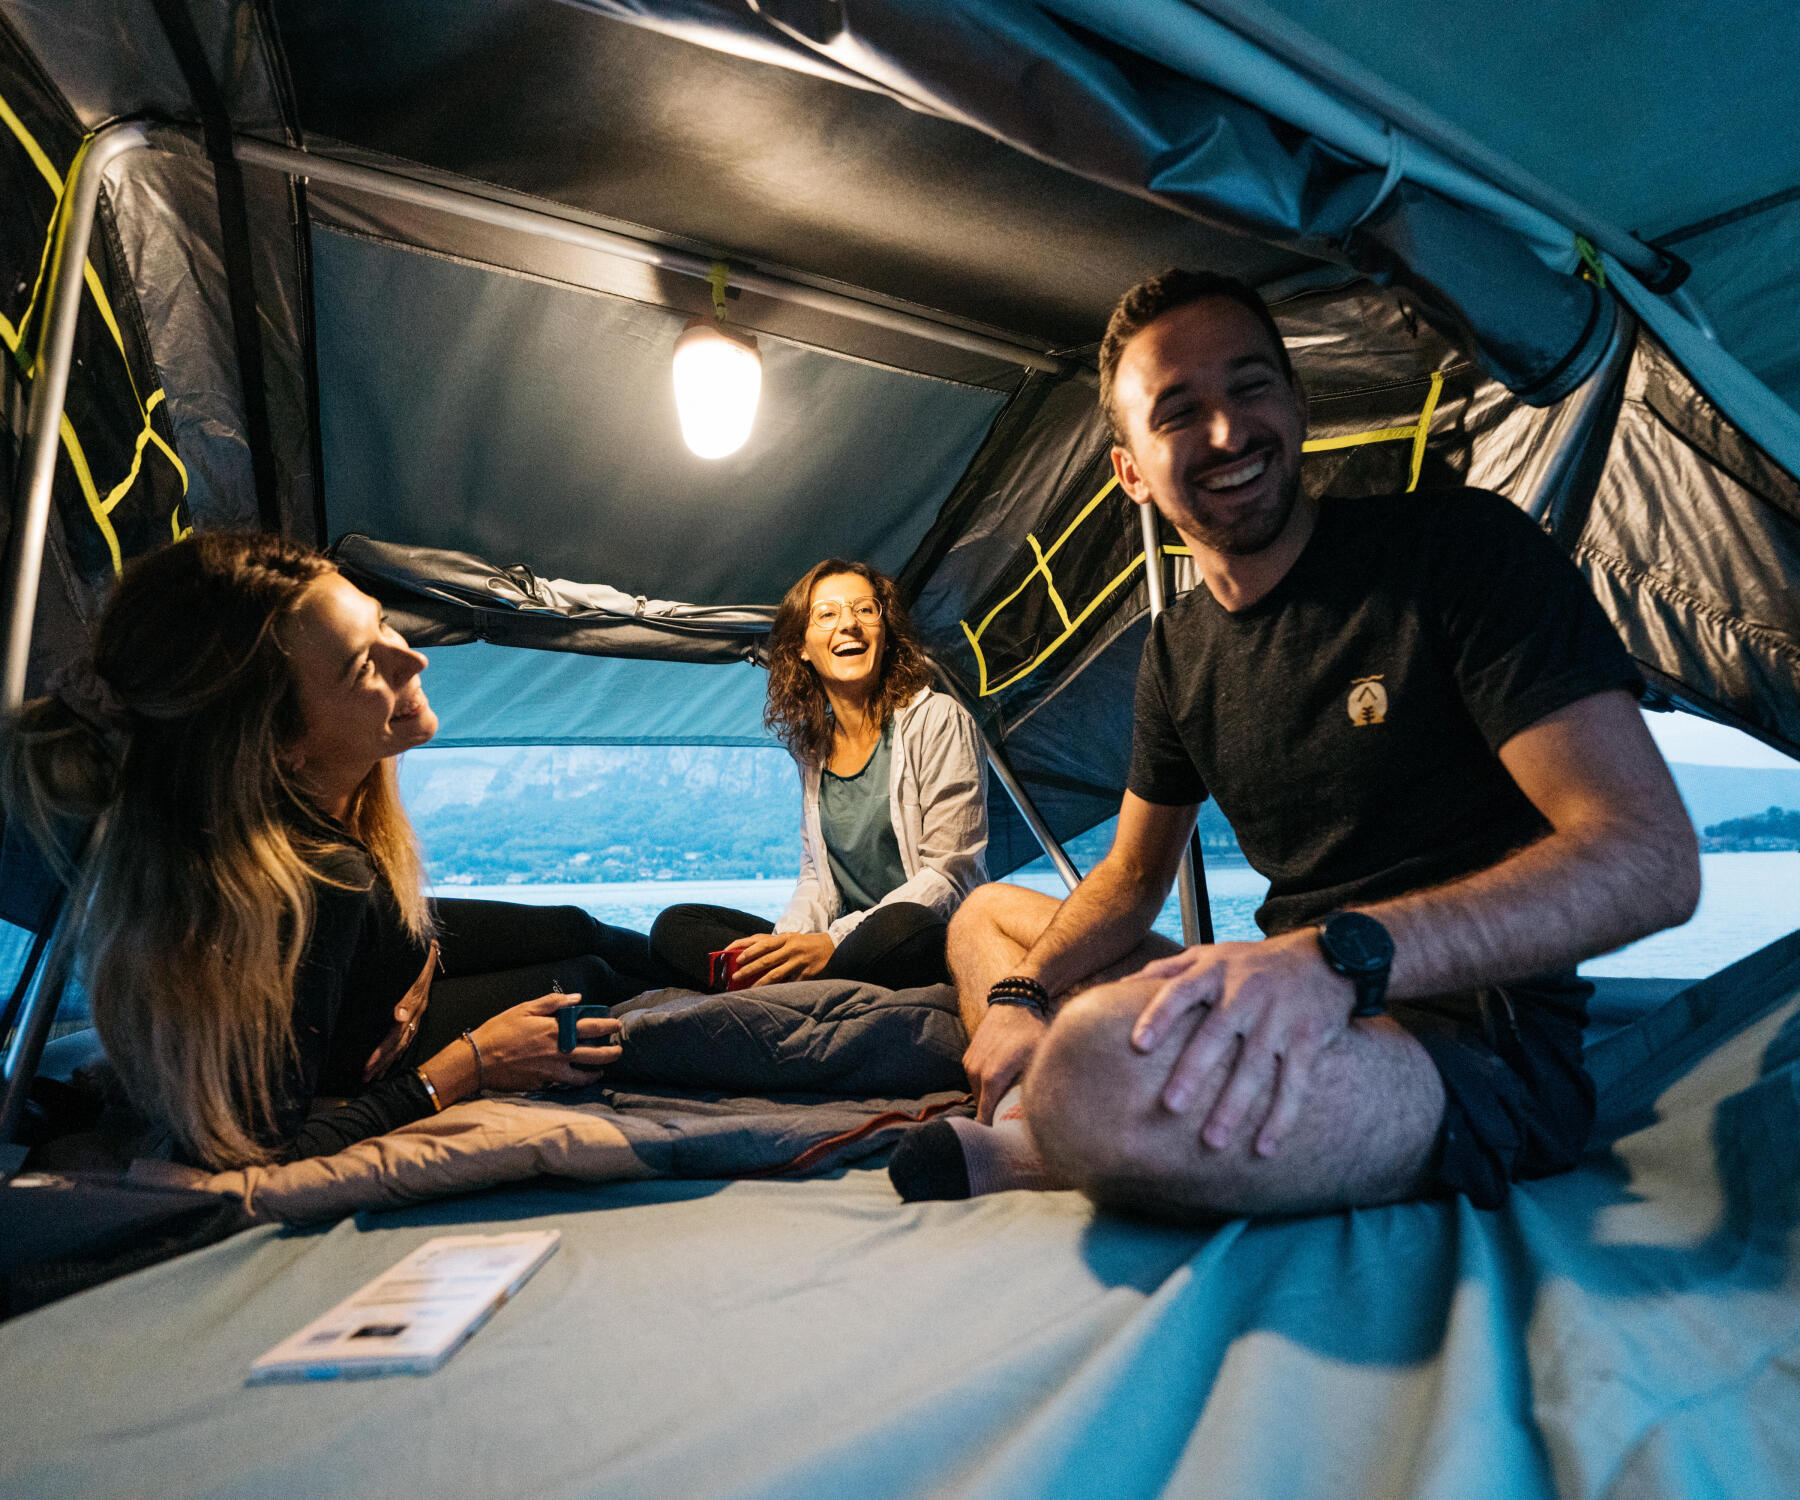 How to choose your roof tent? 